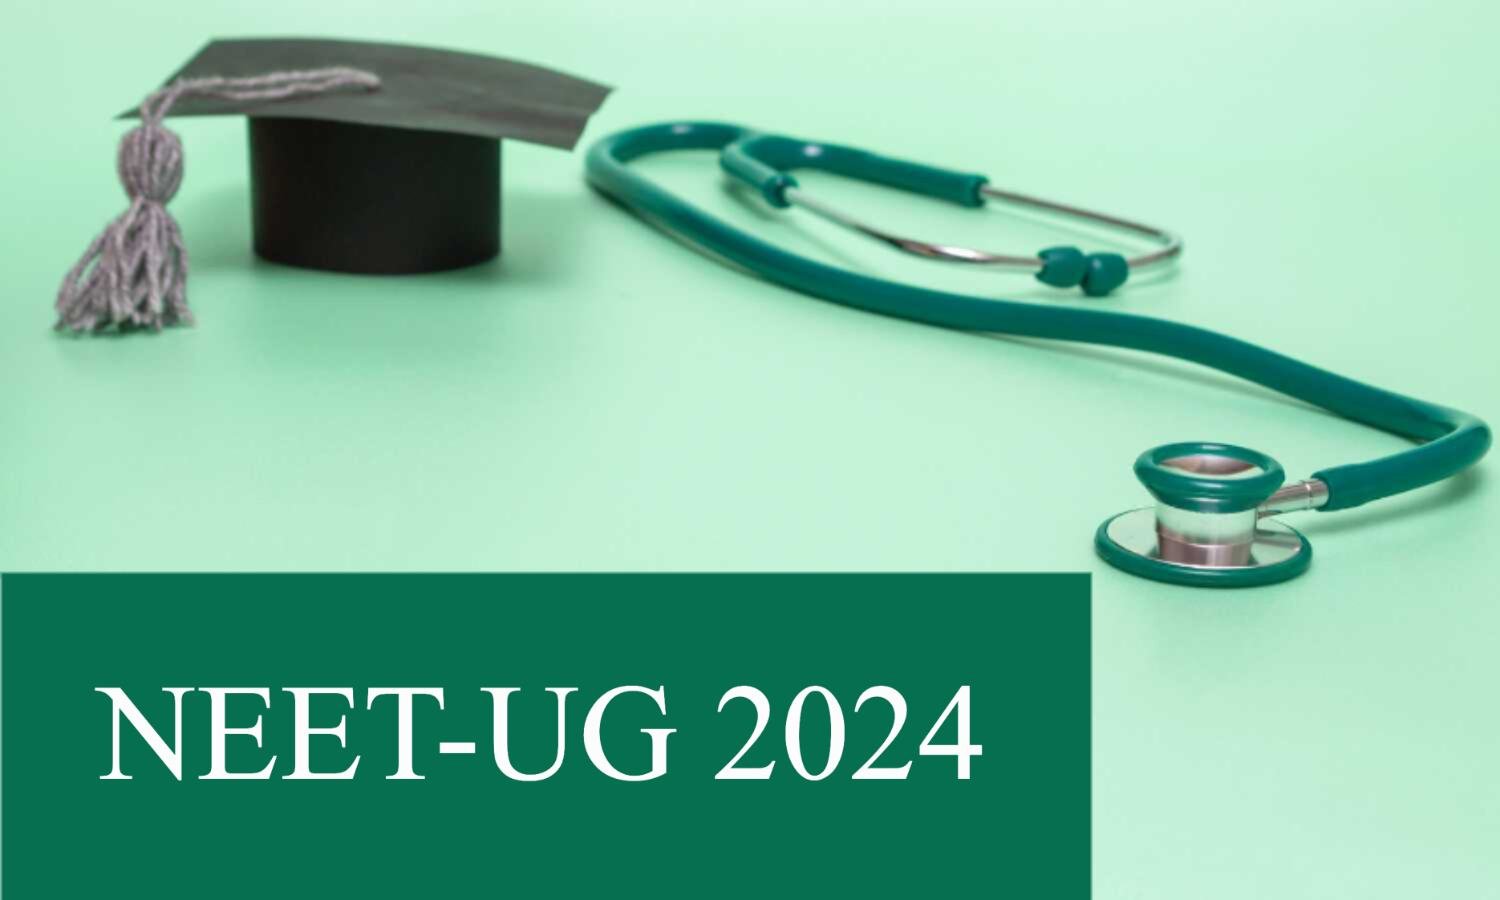 NEET UG 2024 Application Ends on March 9; Important Things to Keep in Mind While Filling Form